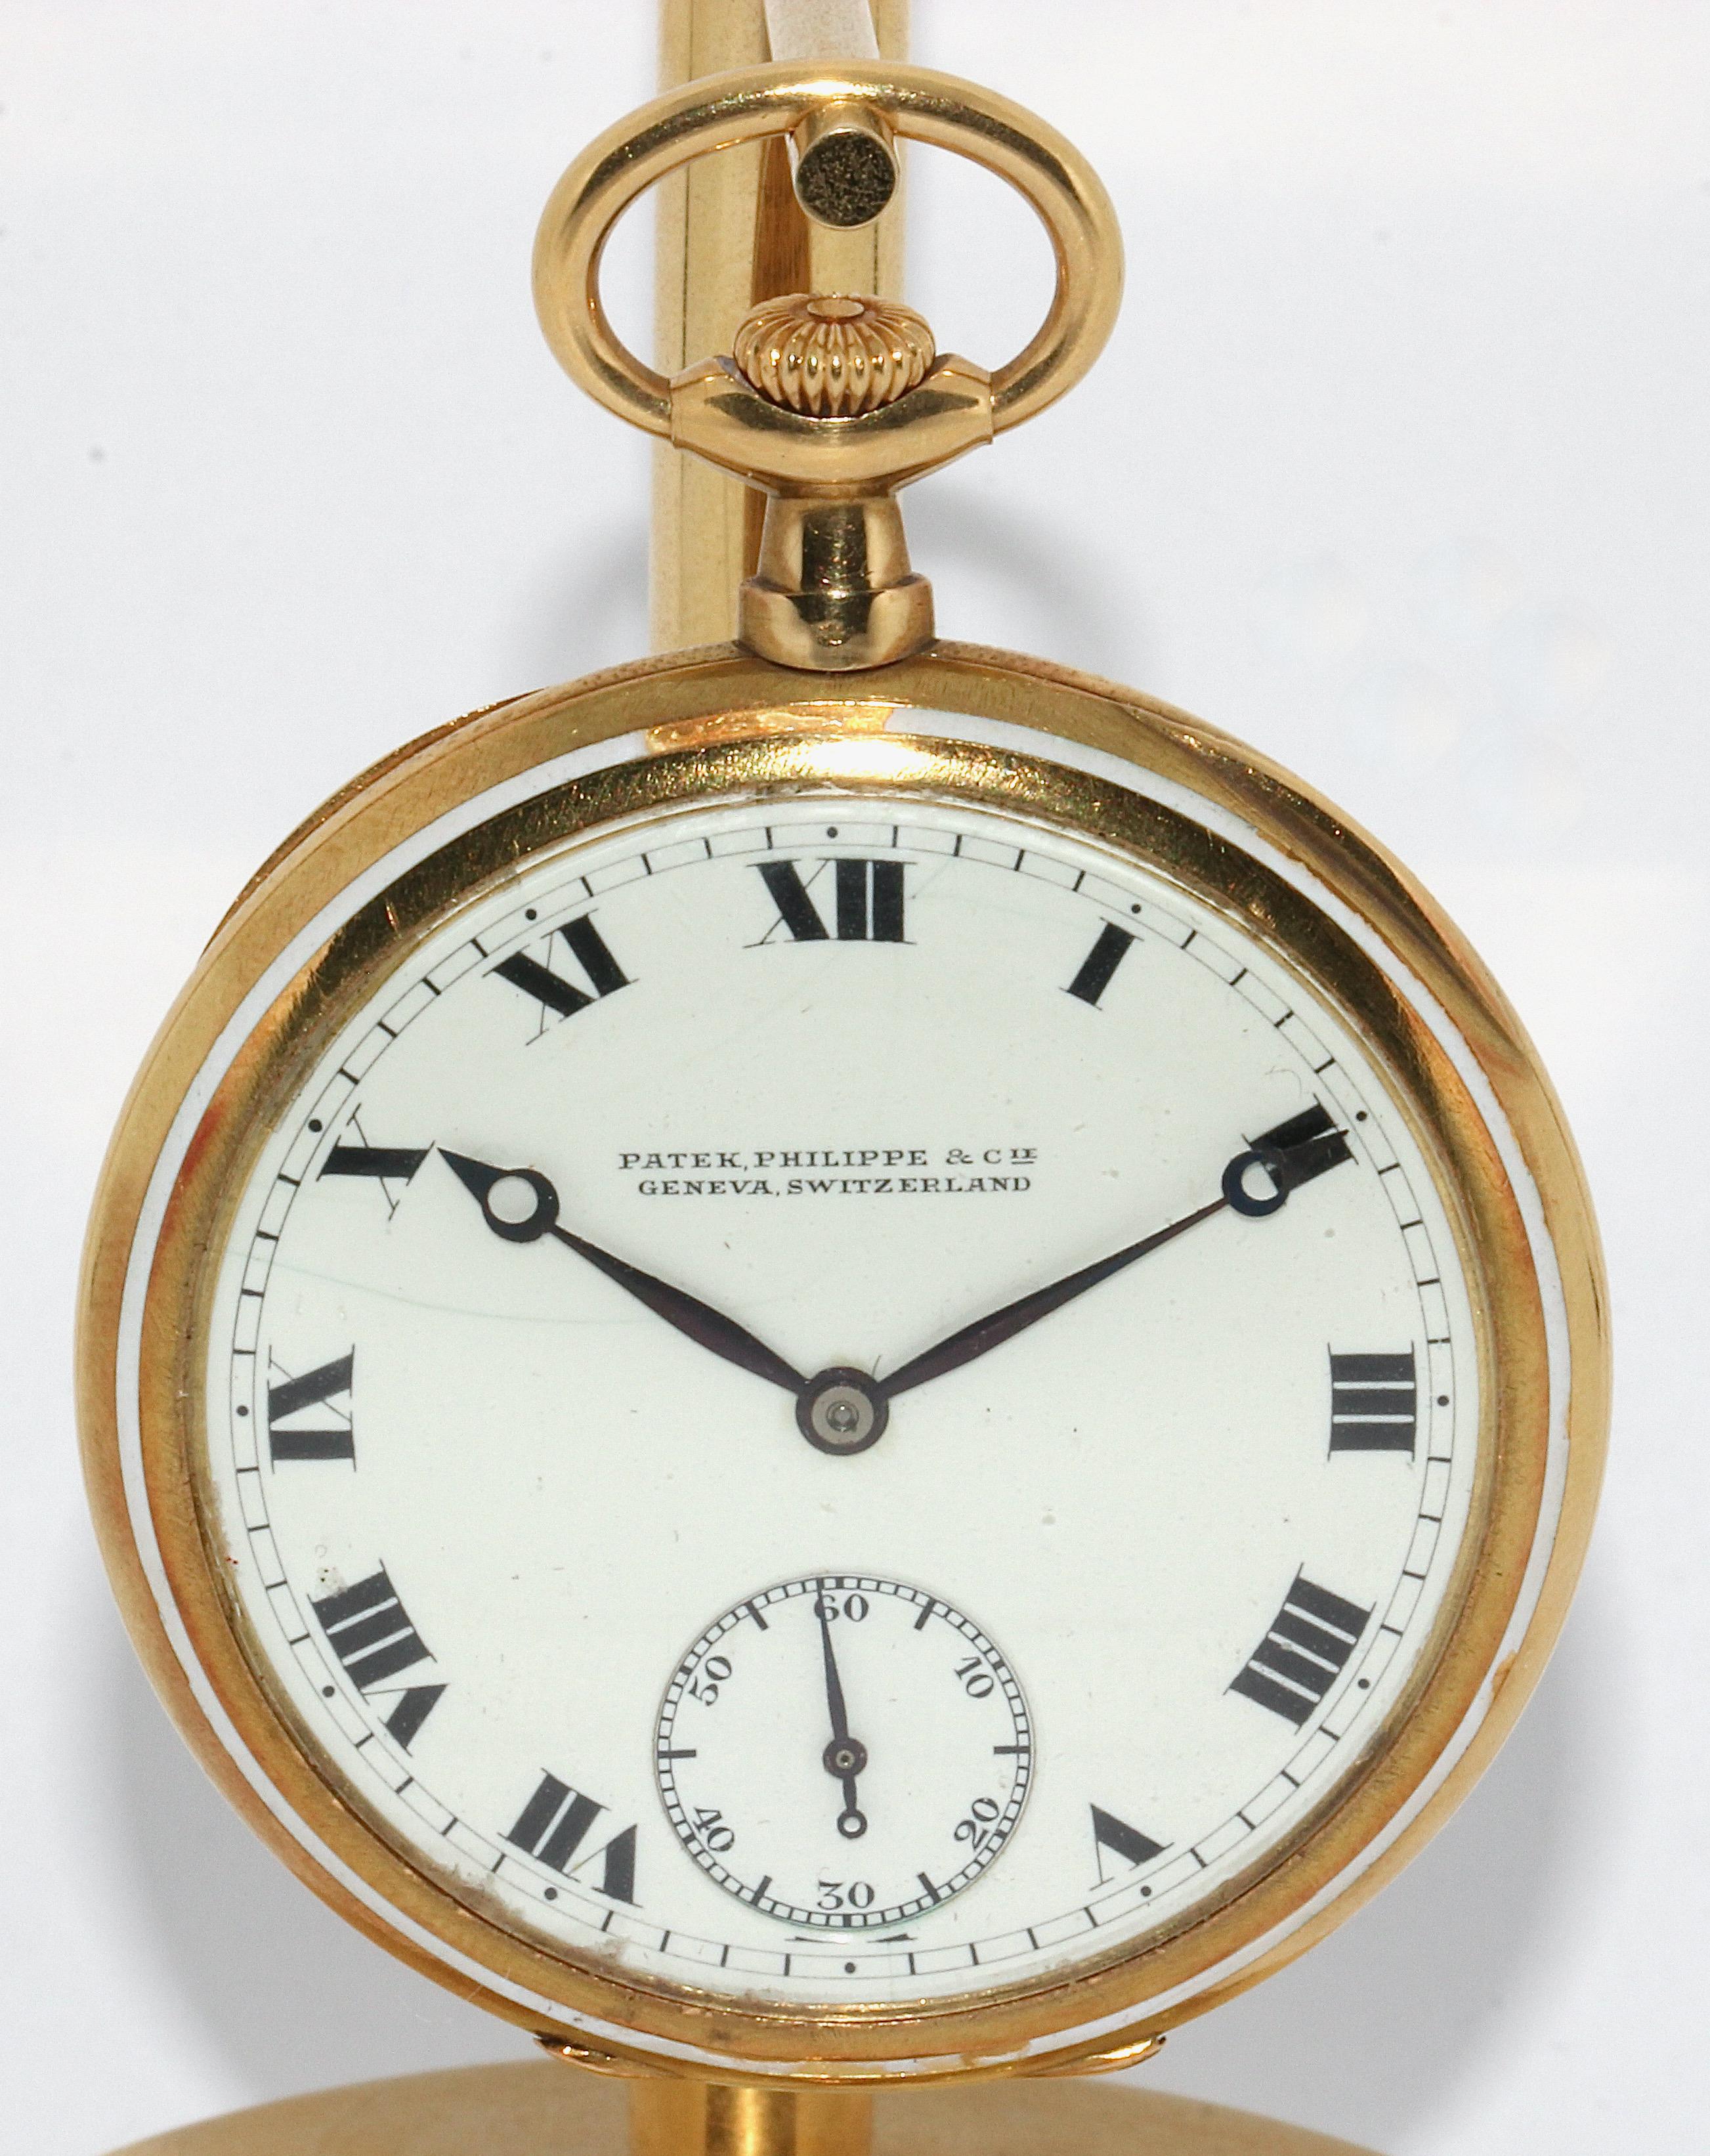 Patek Philippe 18 Karat Gold Pomp Pocket Watch.

Slight signs of wear due to age on the case.
Dial with hairline crack. Enamel decoration worn in places.

Diameter measured without the crown.
The pocket watch can be wound, the movement works and the